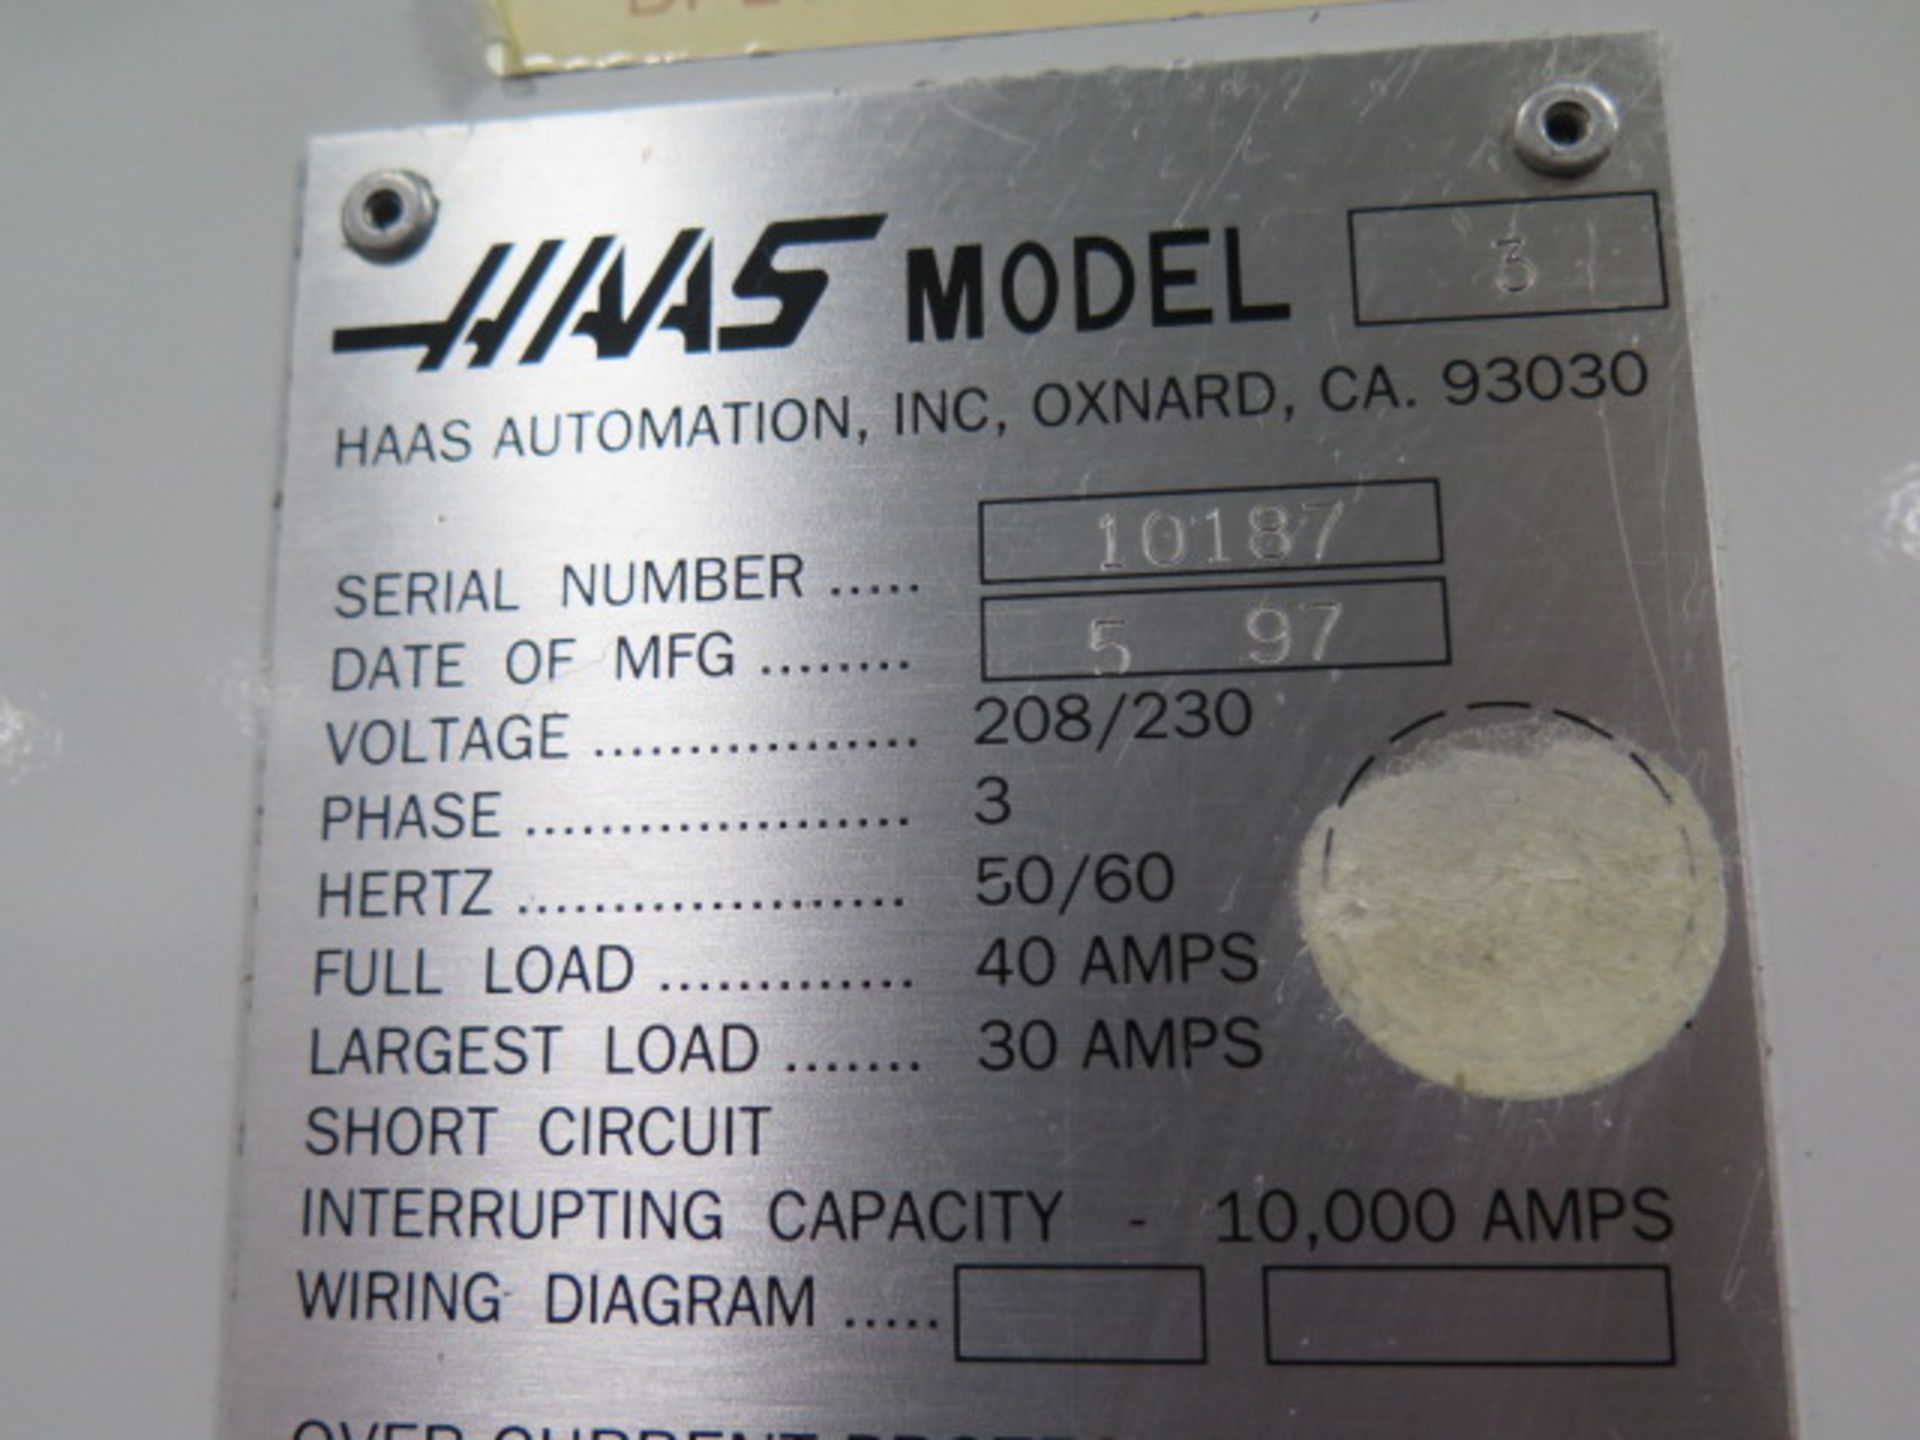 1997 Haas VF-3 4-Axis CNC Vertical Machining Center s/n 10187 w/ Haas Controls, 20-Station ATC, BT- - Image 17 of 17